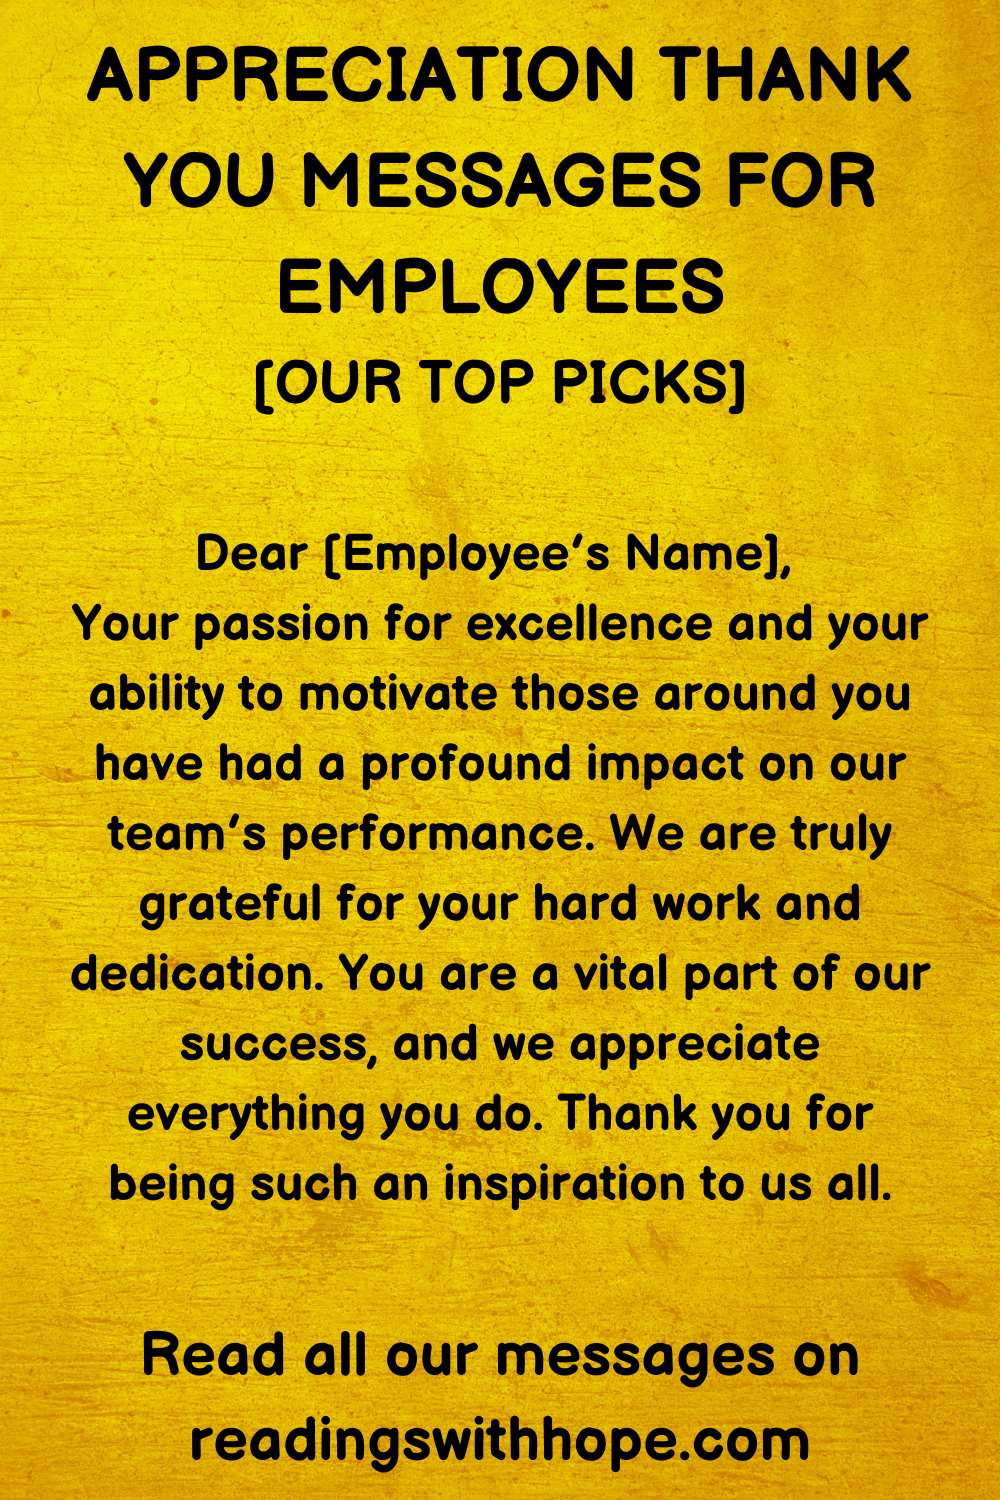 Appreciation Thank You Message for Employees